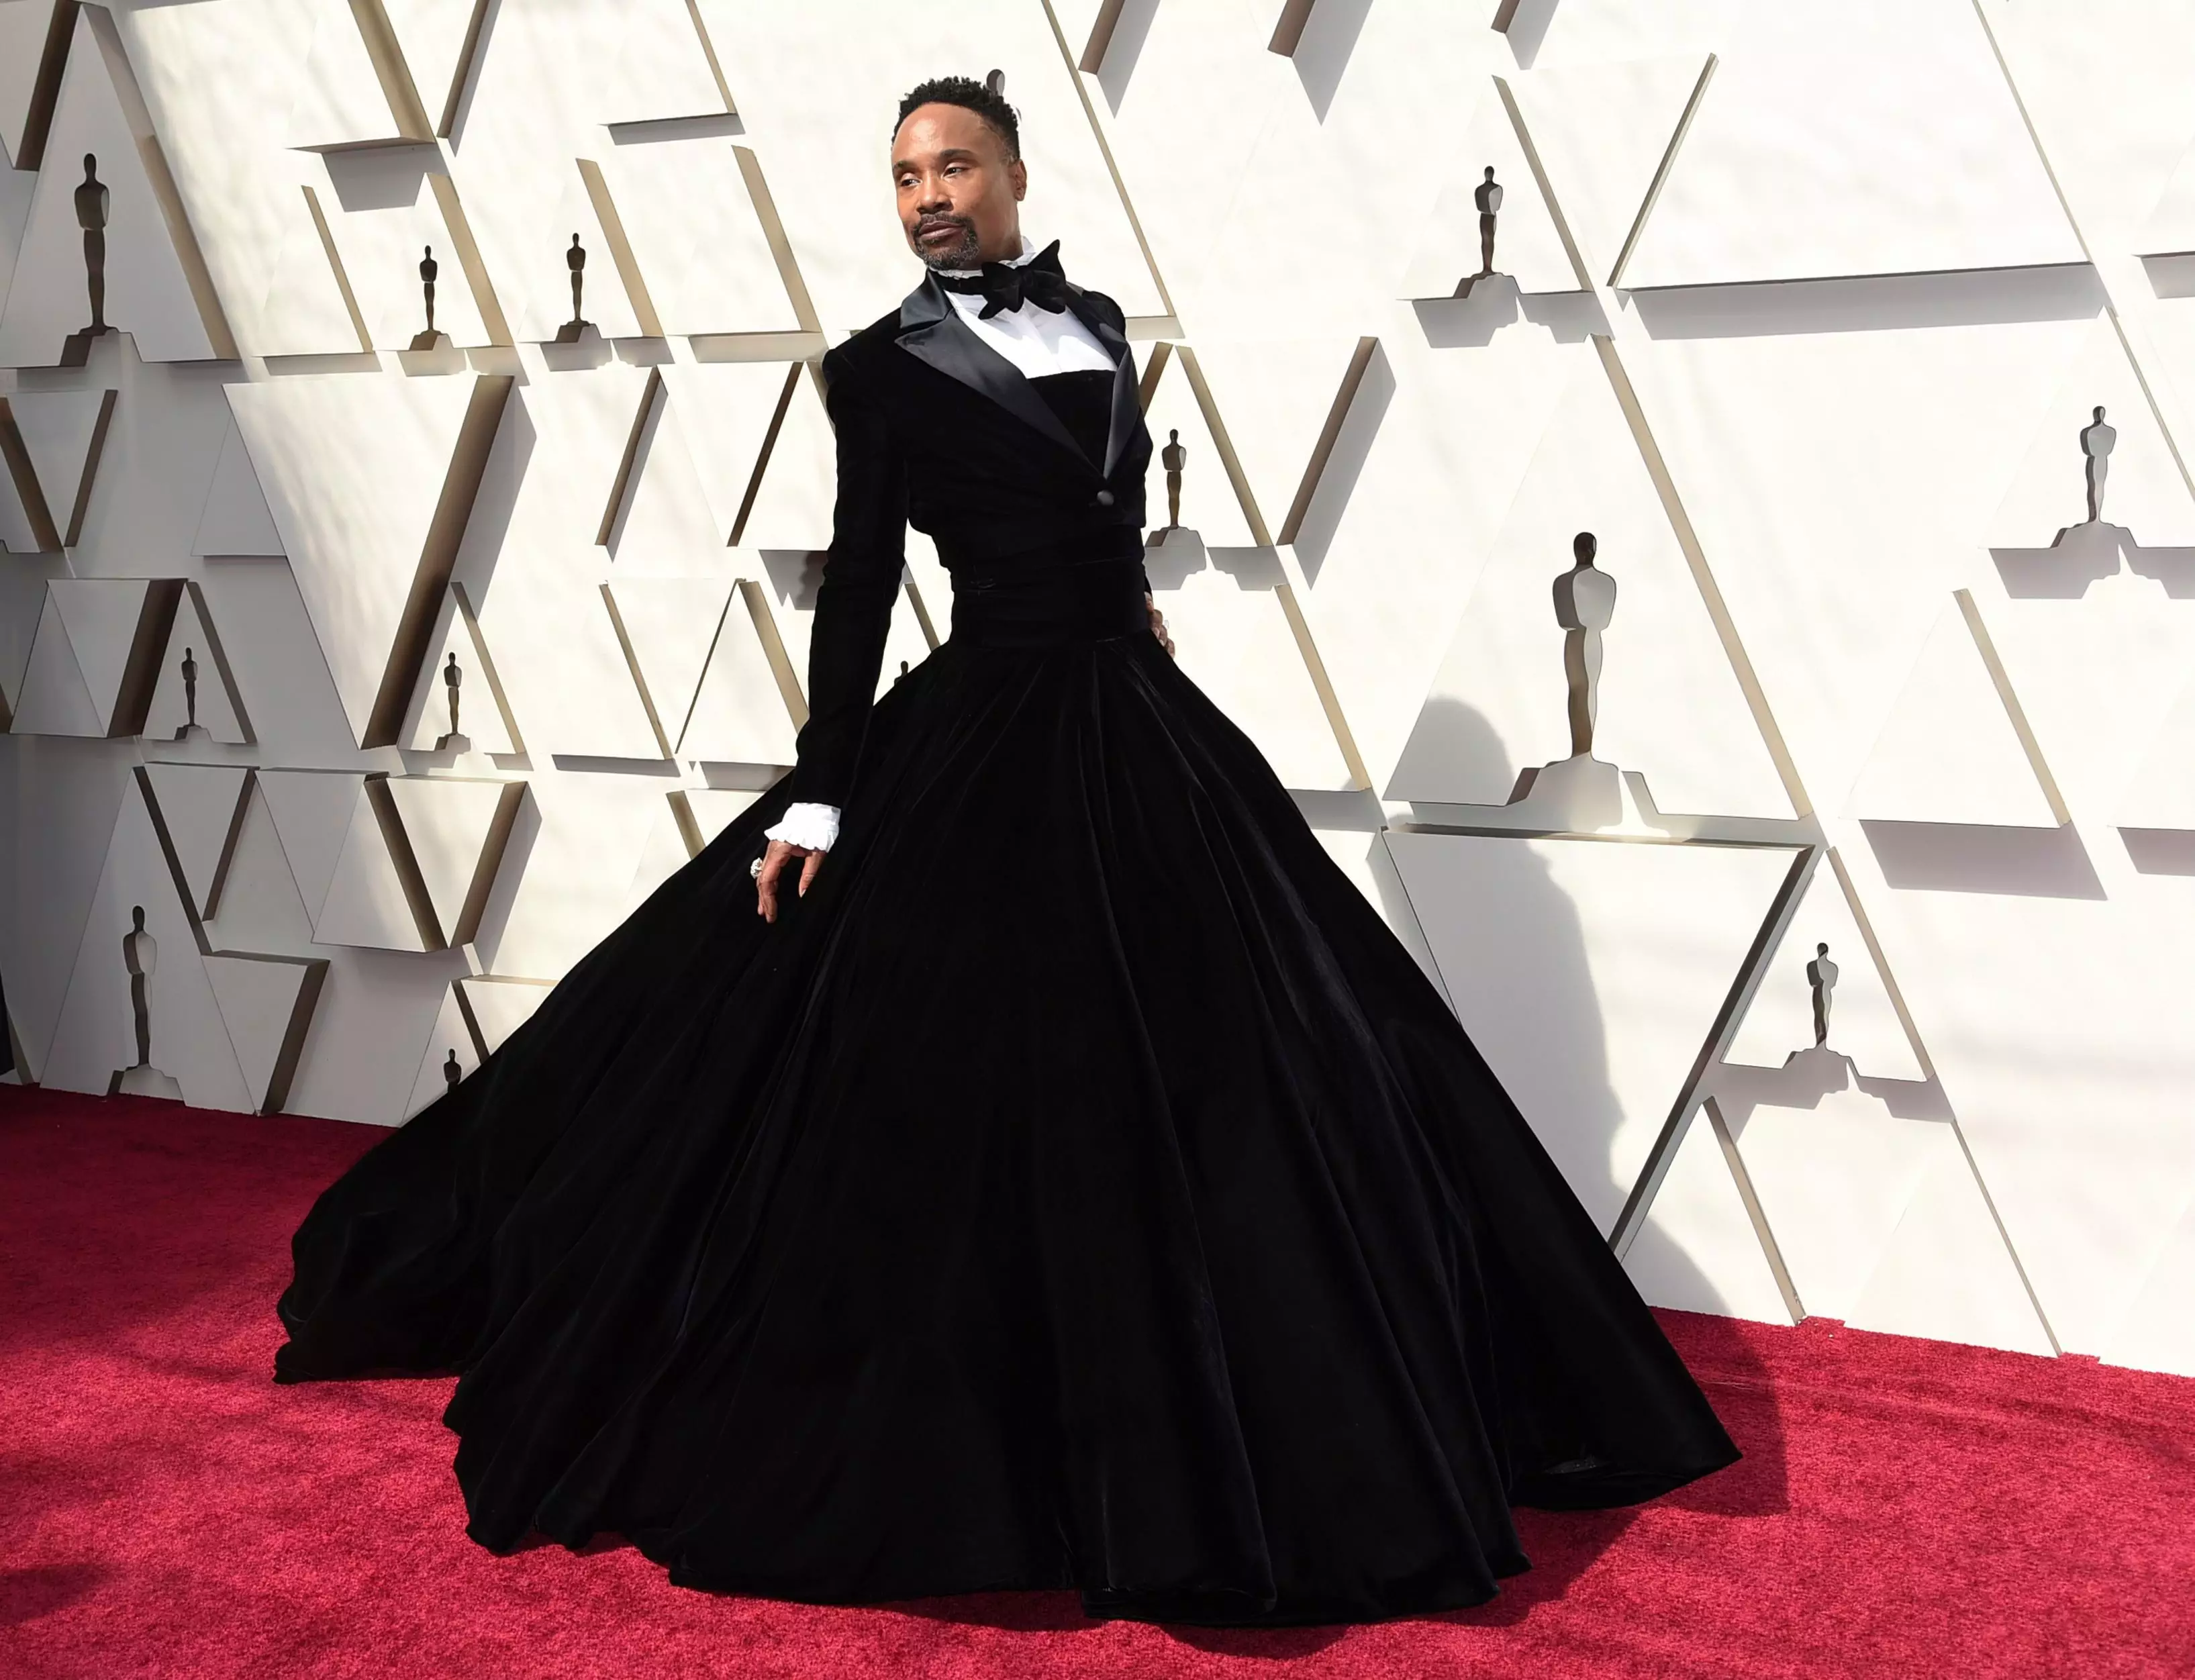 Billy Porter struck a delicate balance between both a 'masculine' and 'feminine' moment at the 2019 awards, making it his own (Richard Shotwell/Invision/AP/Shutterstock).